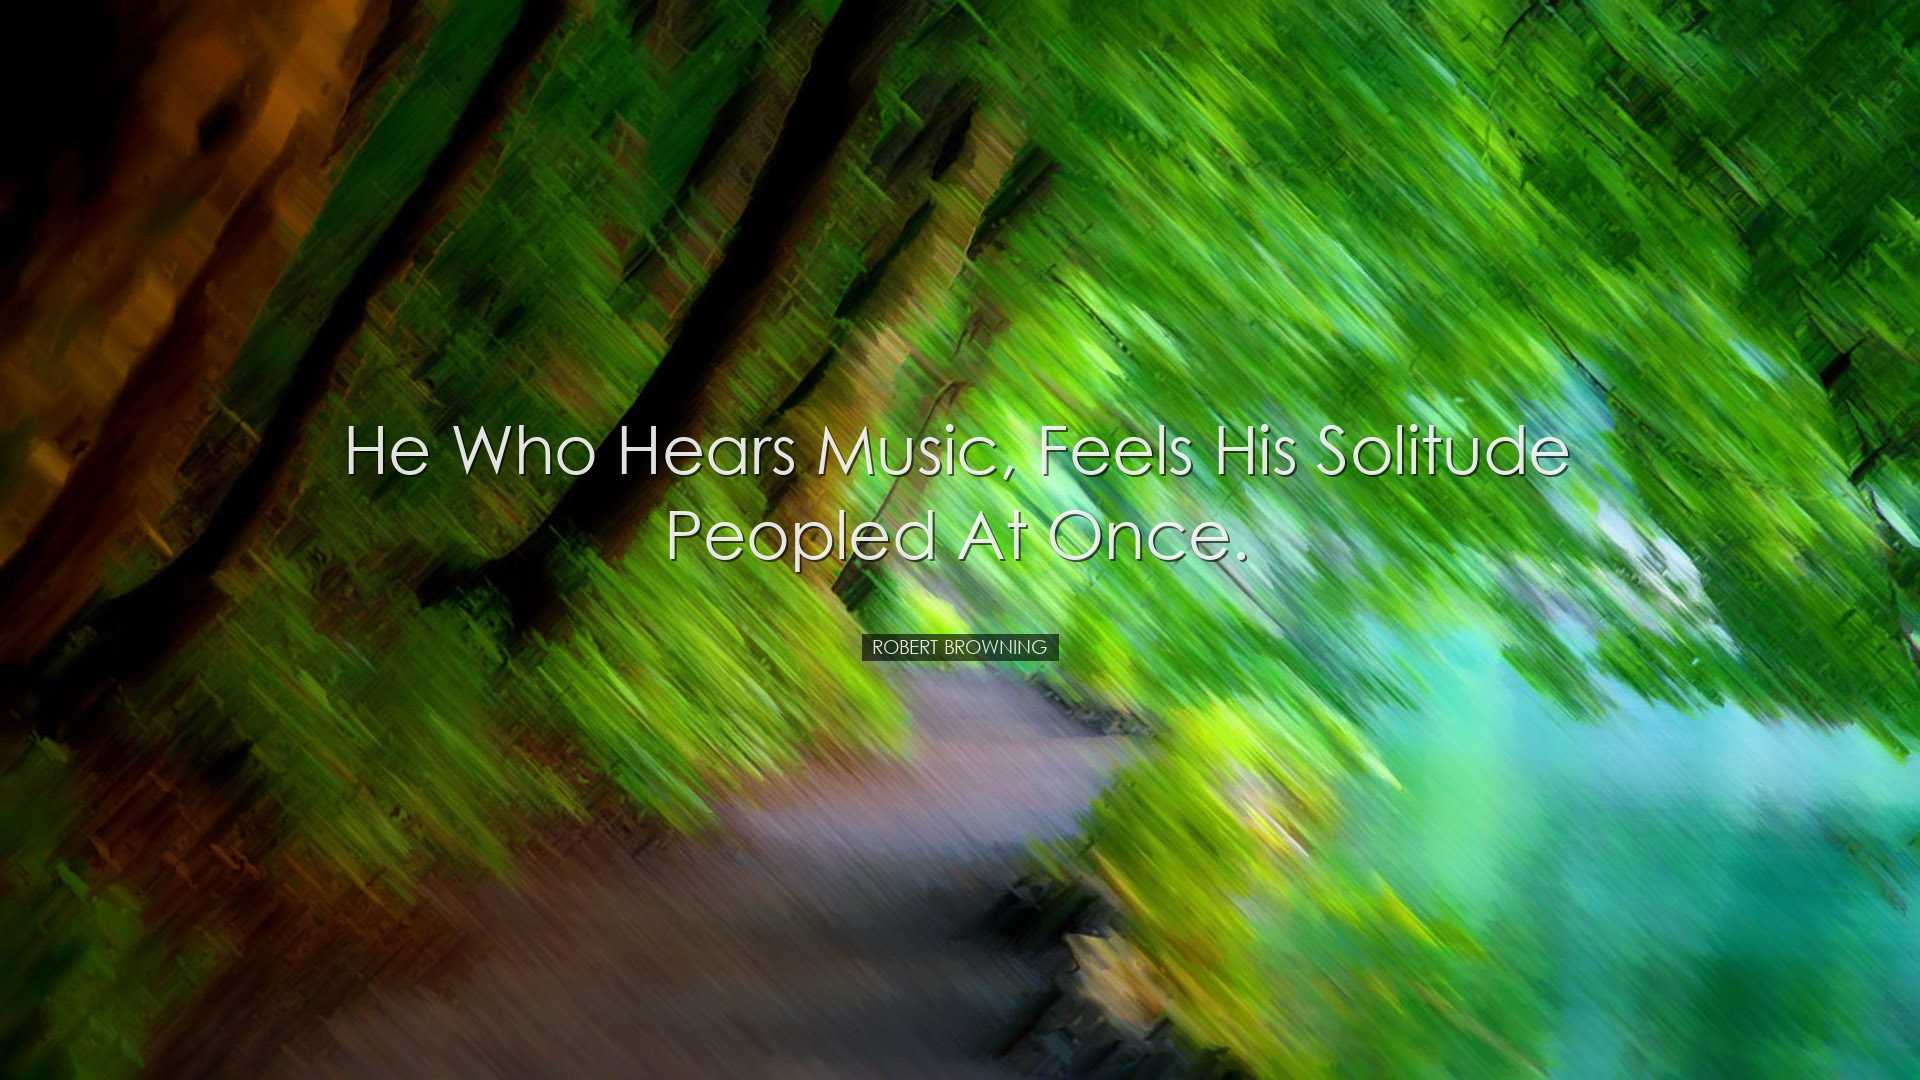 He who hears music, feels his solitude peopled at once. - Robert B